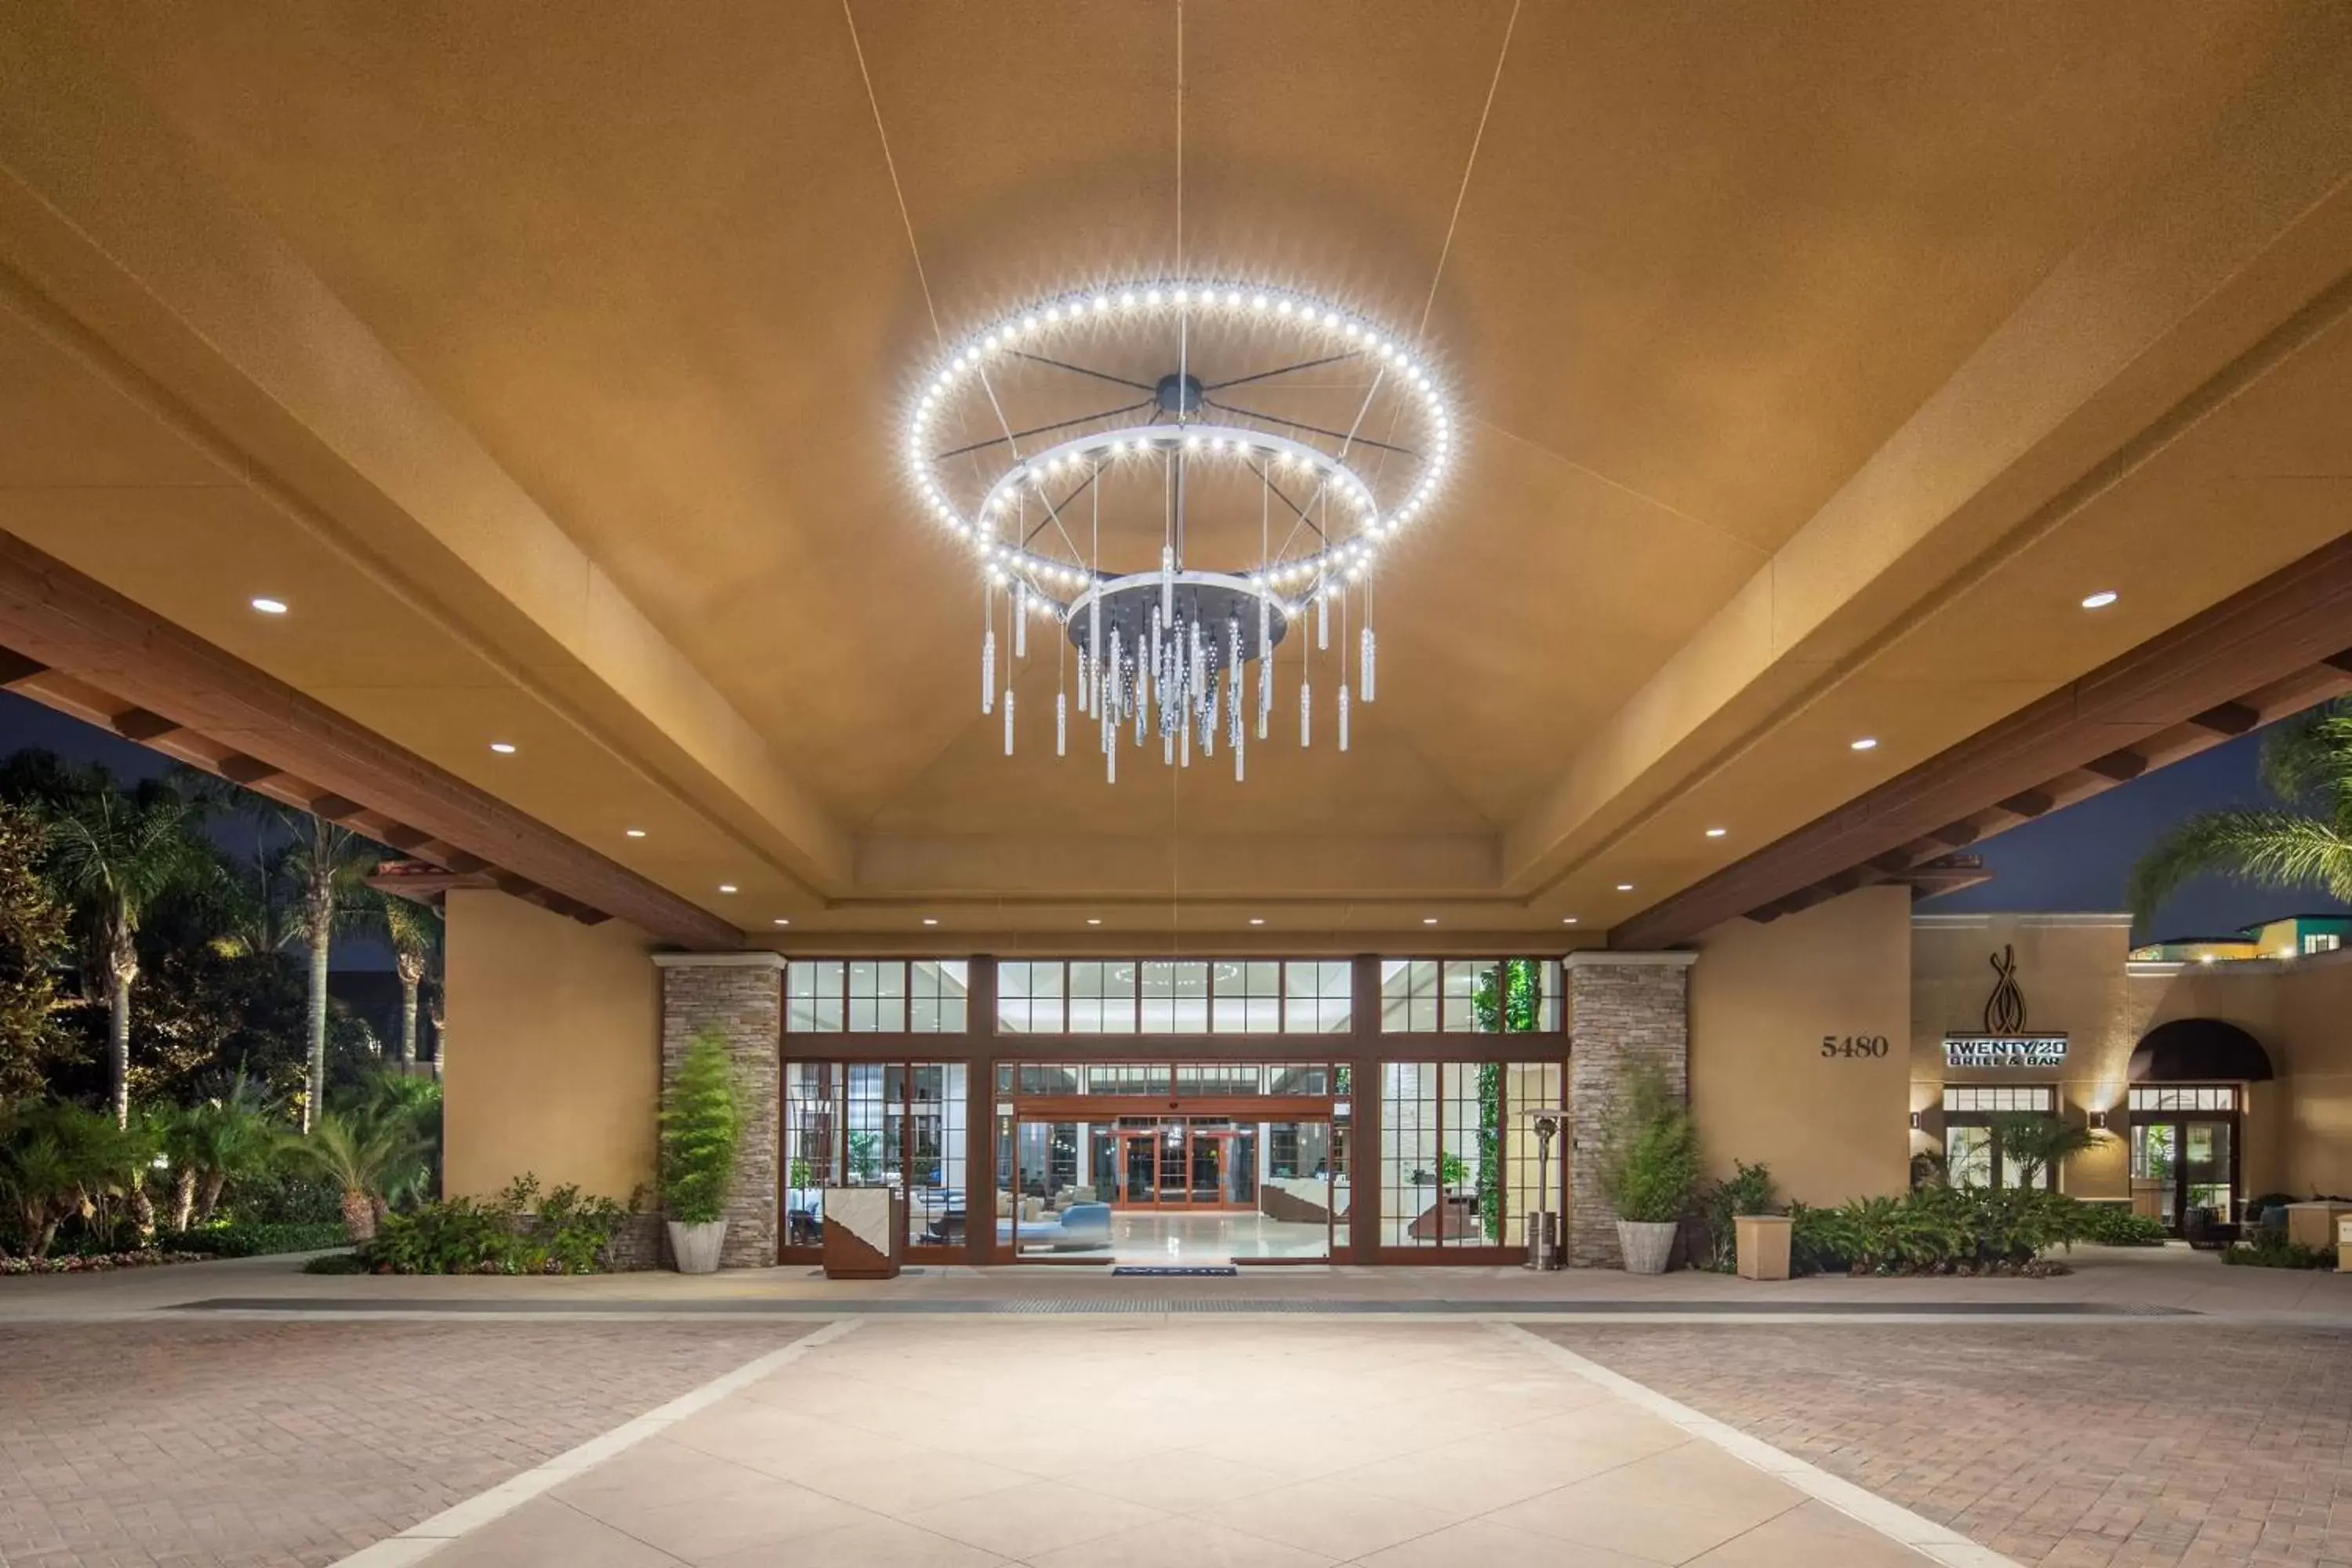 Property building in The Westin Carlsbad Resort & Spa